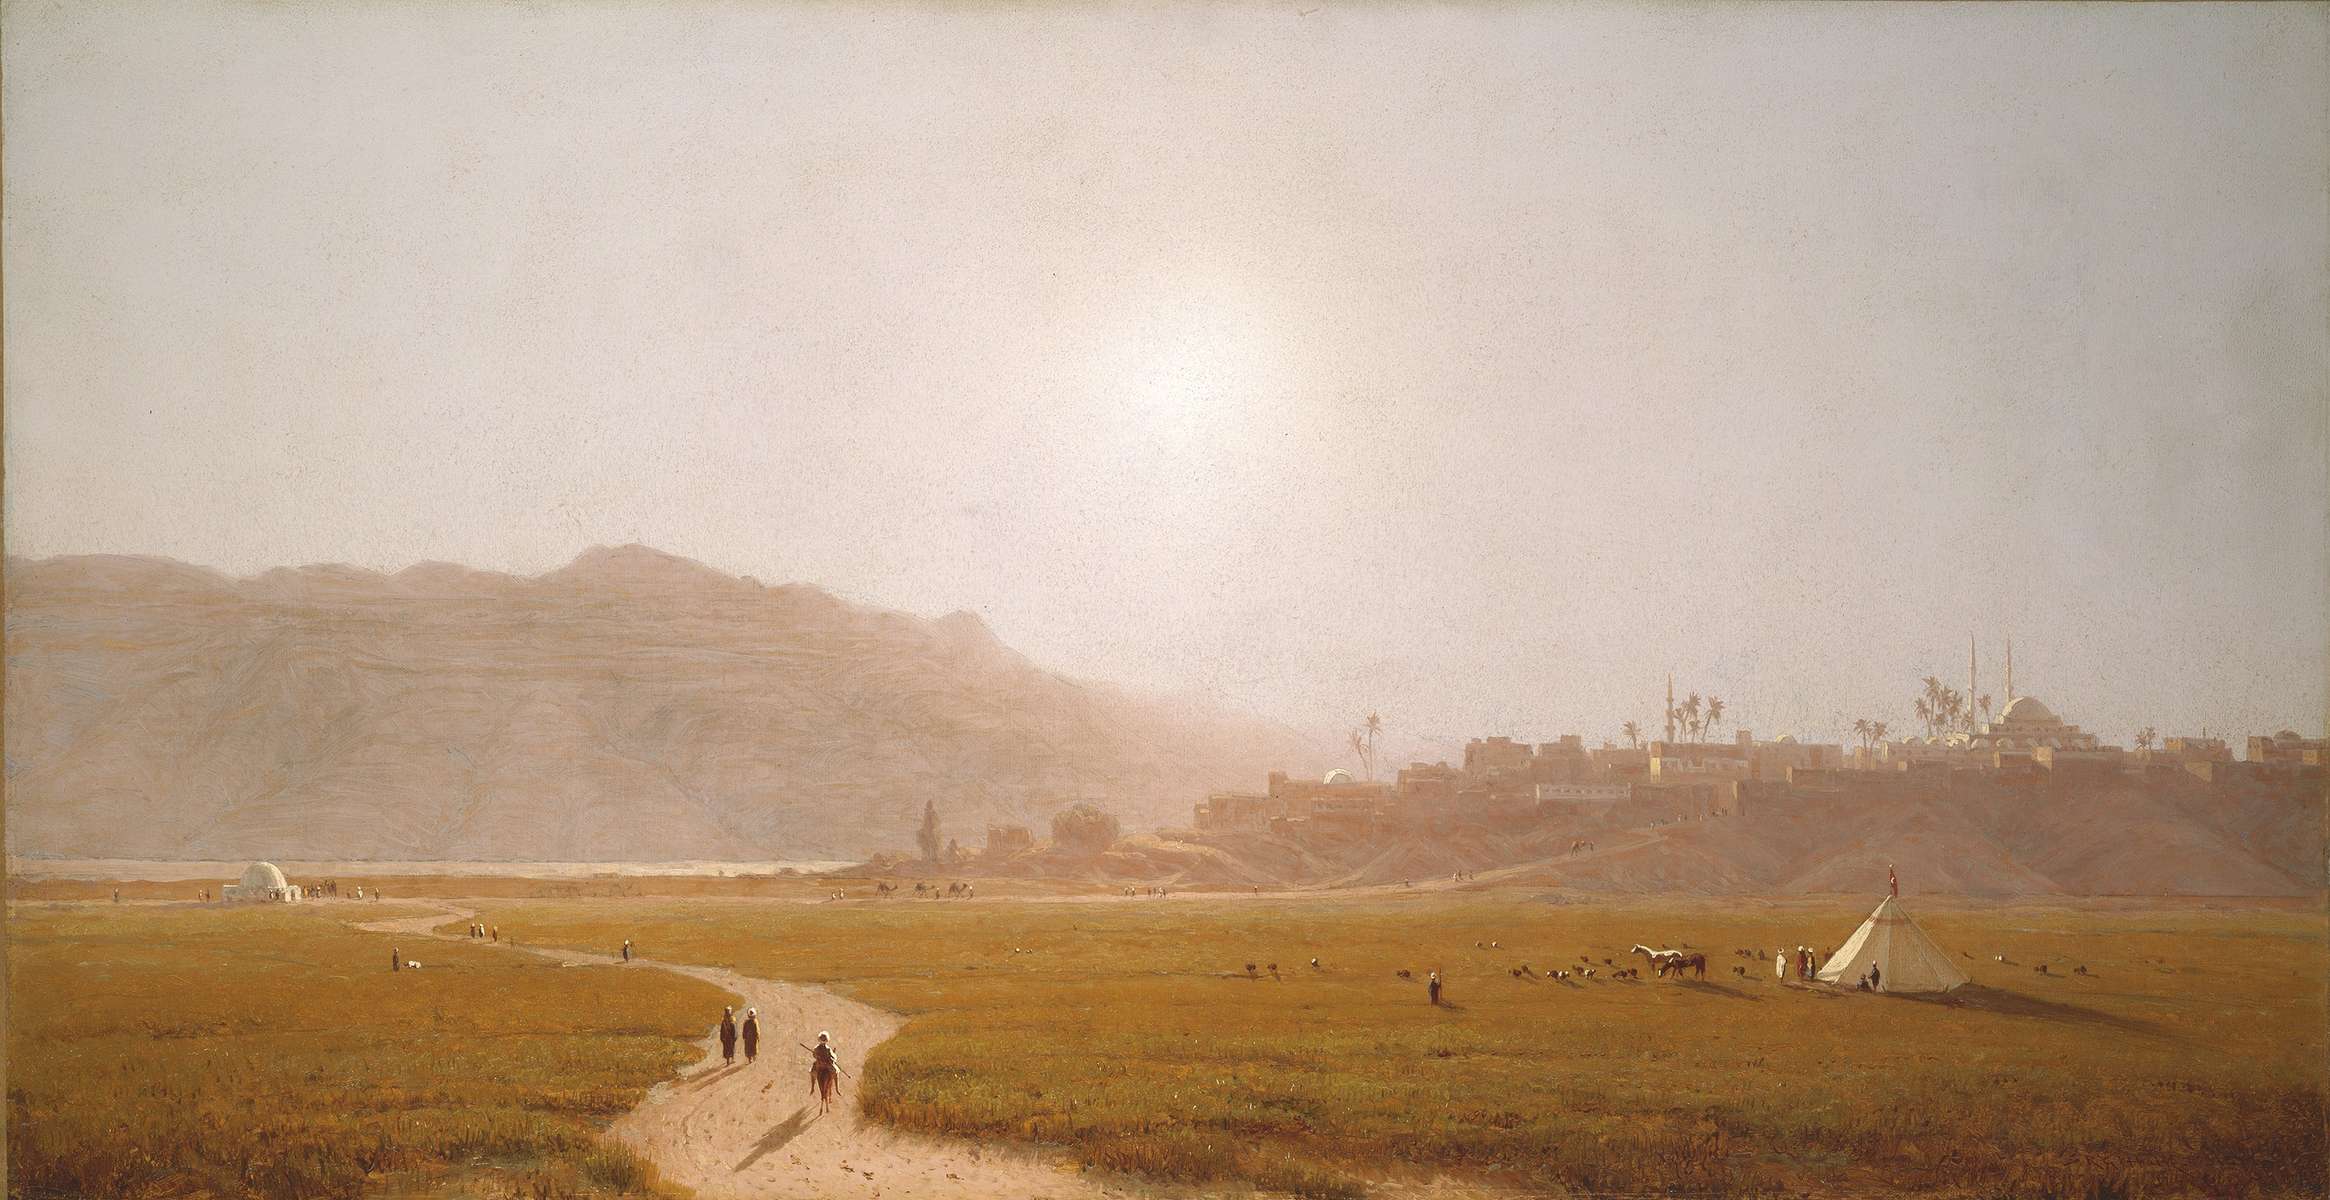 Sanford Robinson Gifford, Siout, Egypt, American, 1823 - 1880, 1874, oil on canvas, New Century Fund, Gift of Joan and David Maxwell